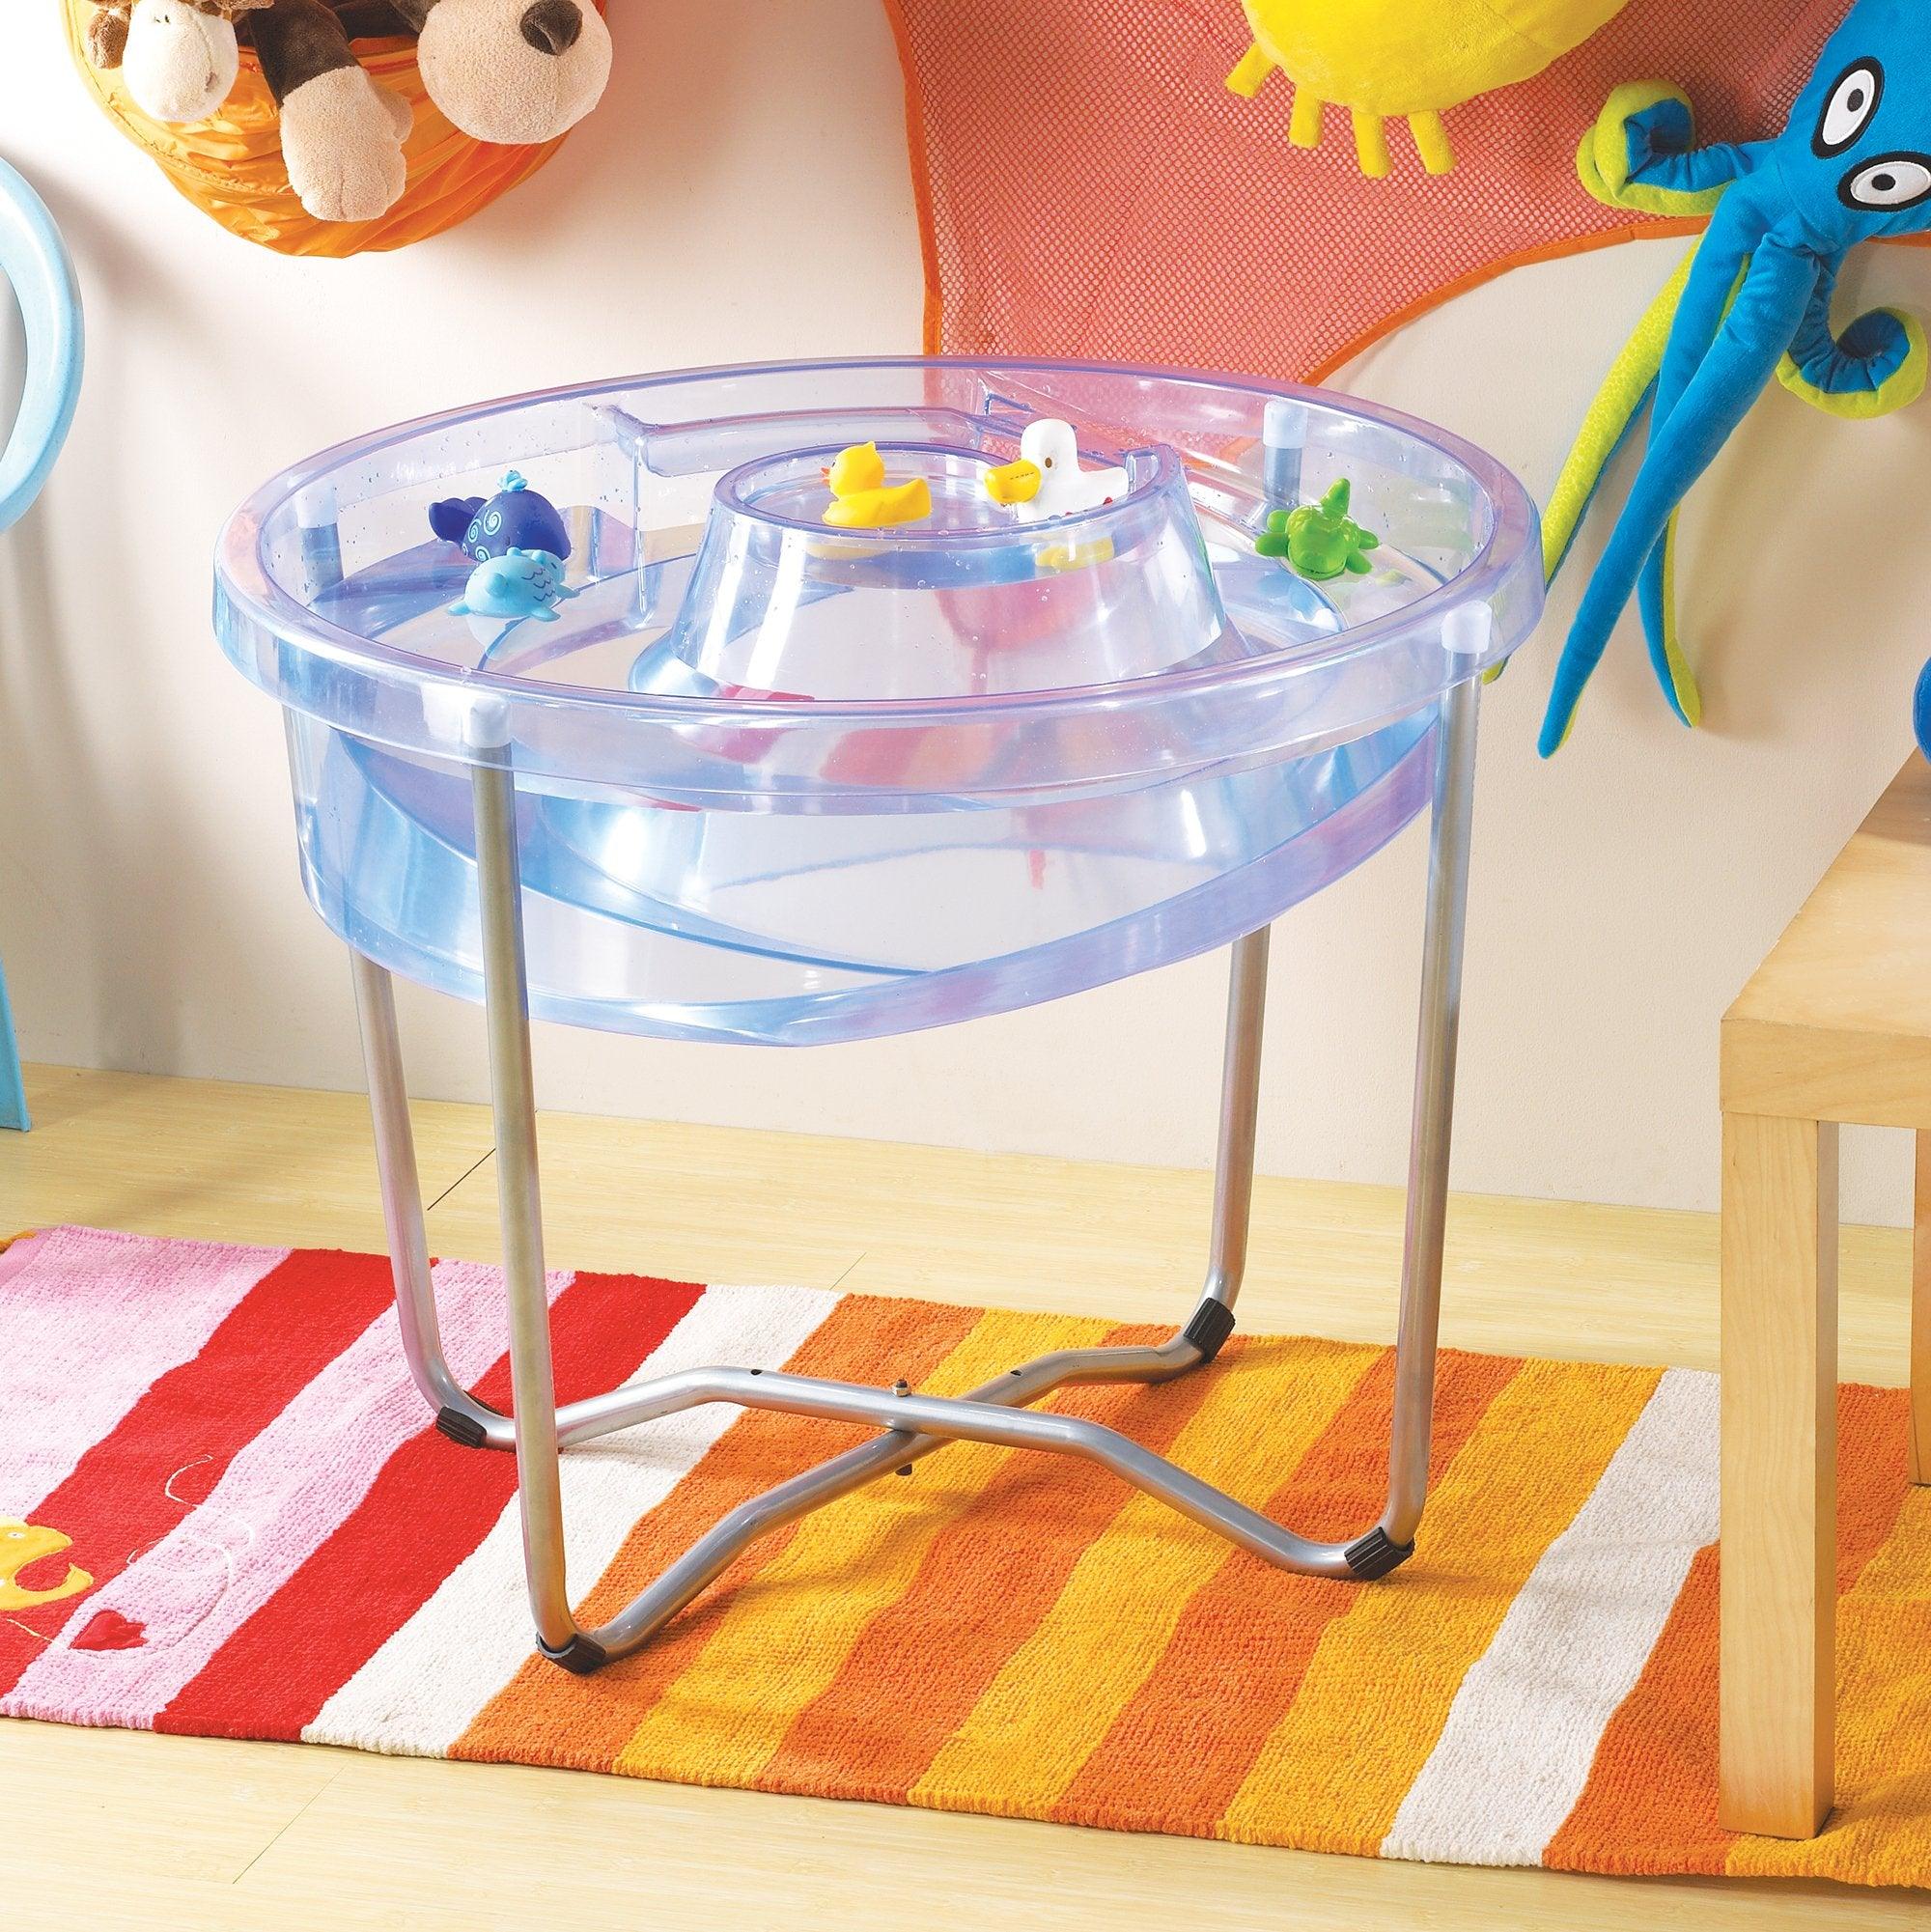 Circular Water Tray and Stand, The Circular Water Tray and stand set is a cleverly designed and versatile clear sand and water tray with central helter skelter for use as a water channel or roadway and an outer trough which together stimulate imaginative play. The Circular Water Tray and stand is beautifully designed and versatile clear sand and water tray with central helter-skelter for use as a water channel or roadway and an outer trough which together stimulate imaginative play.The Circular Water Tray a